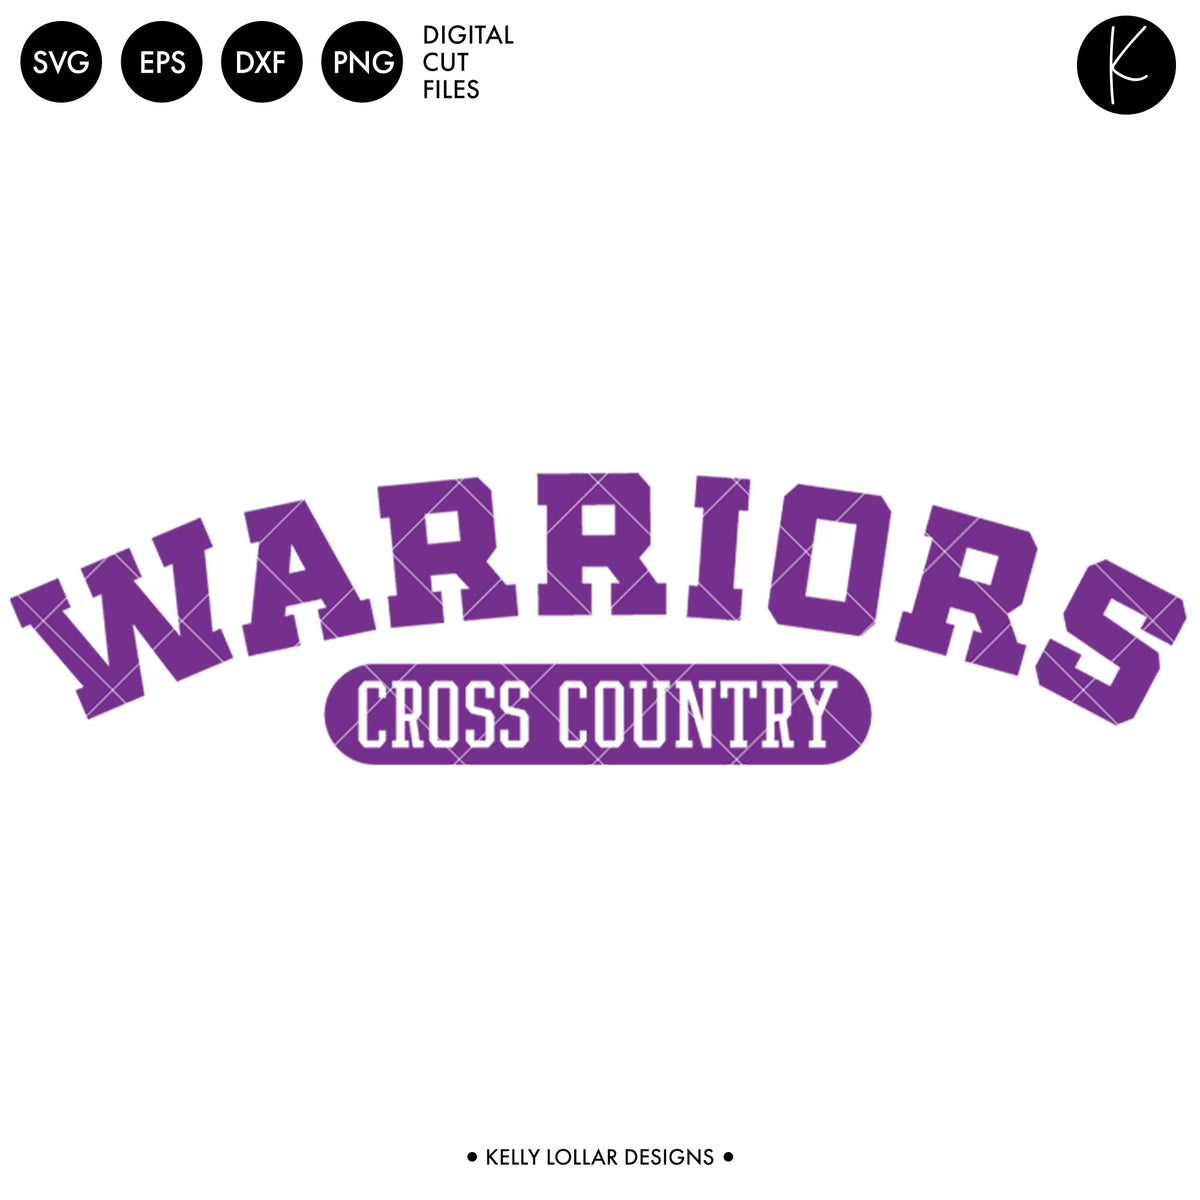 Warriors Cross Country Bundle | SVG DXF EPS PNG Cut Files